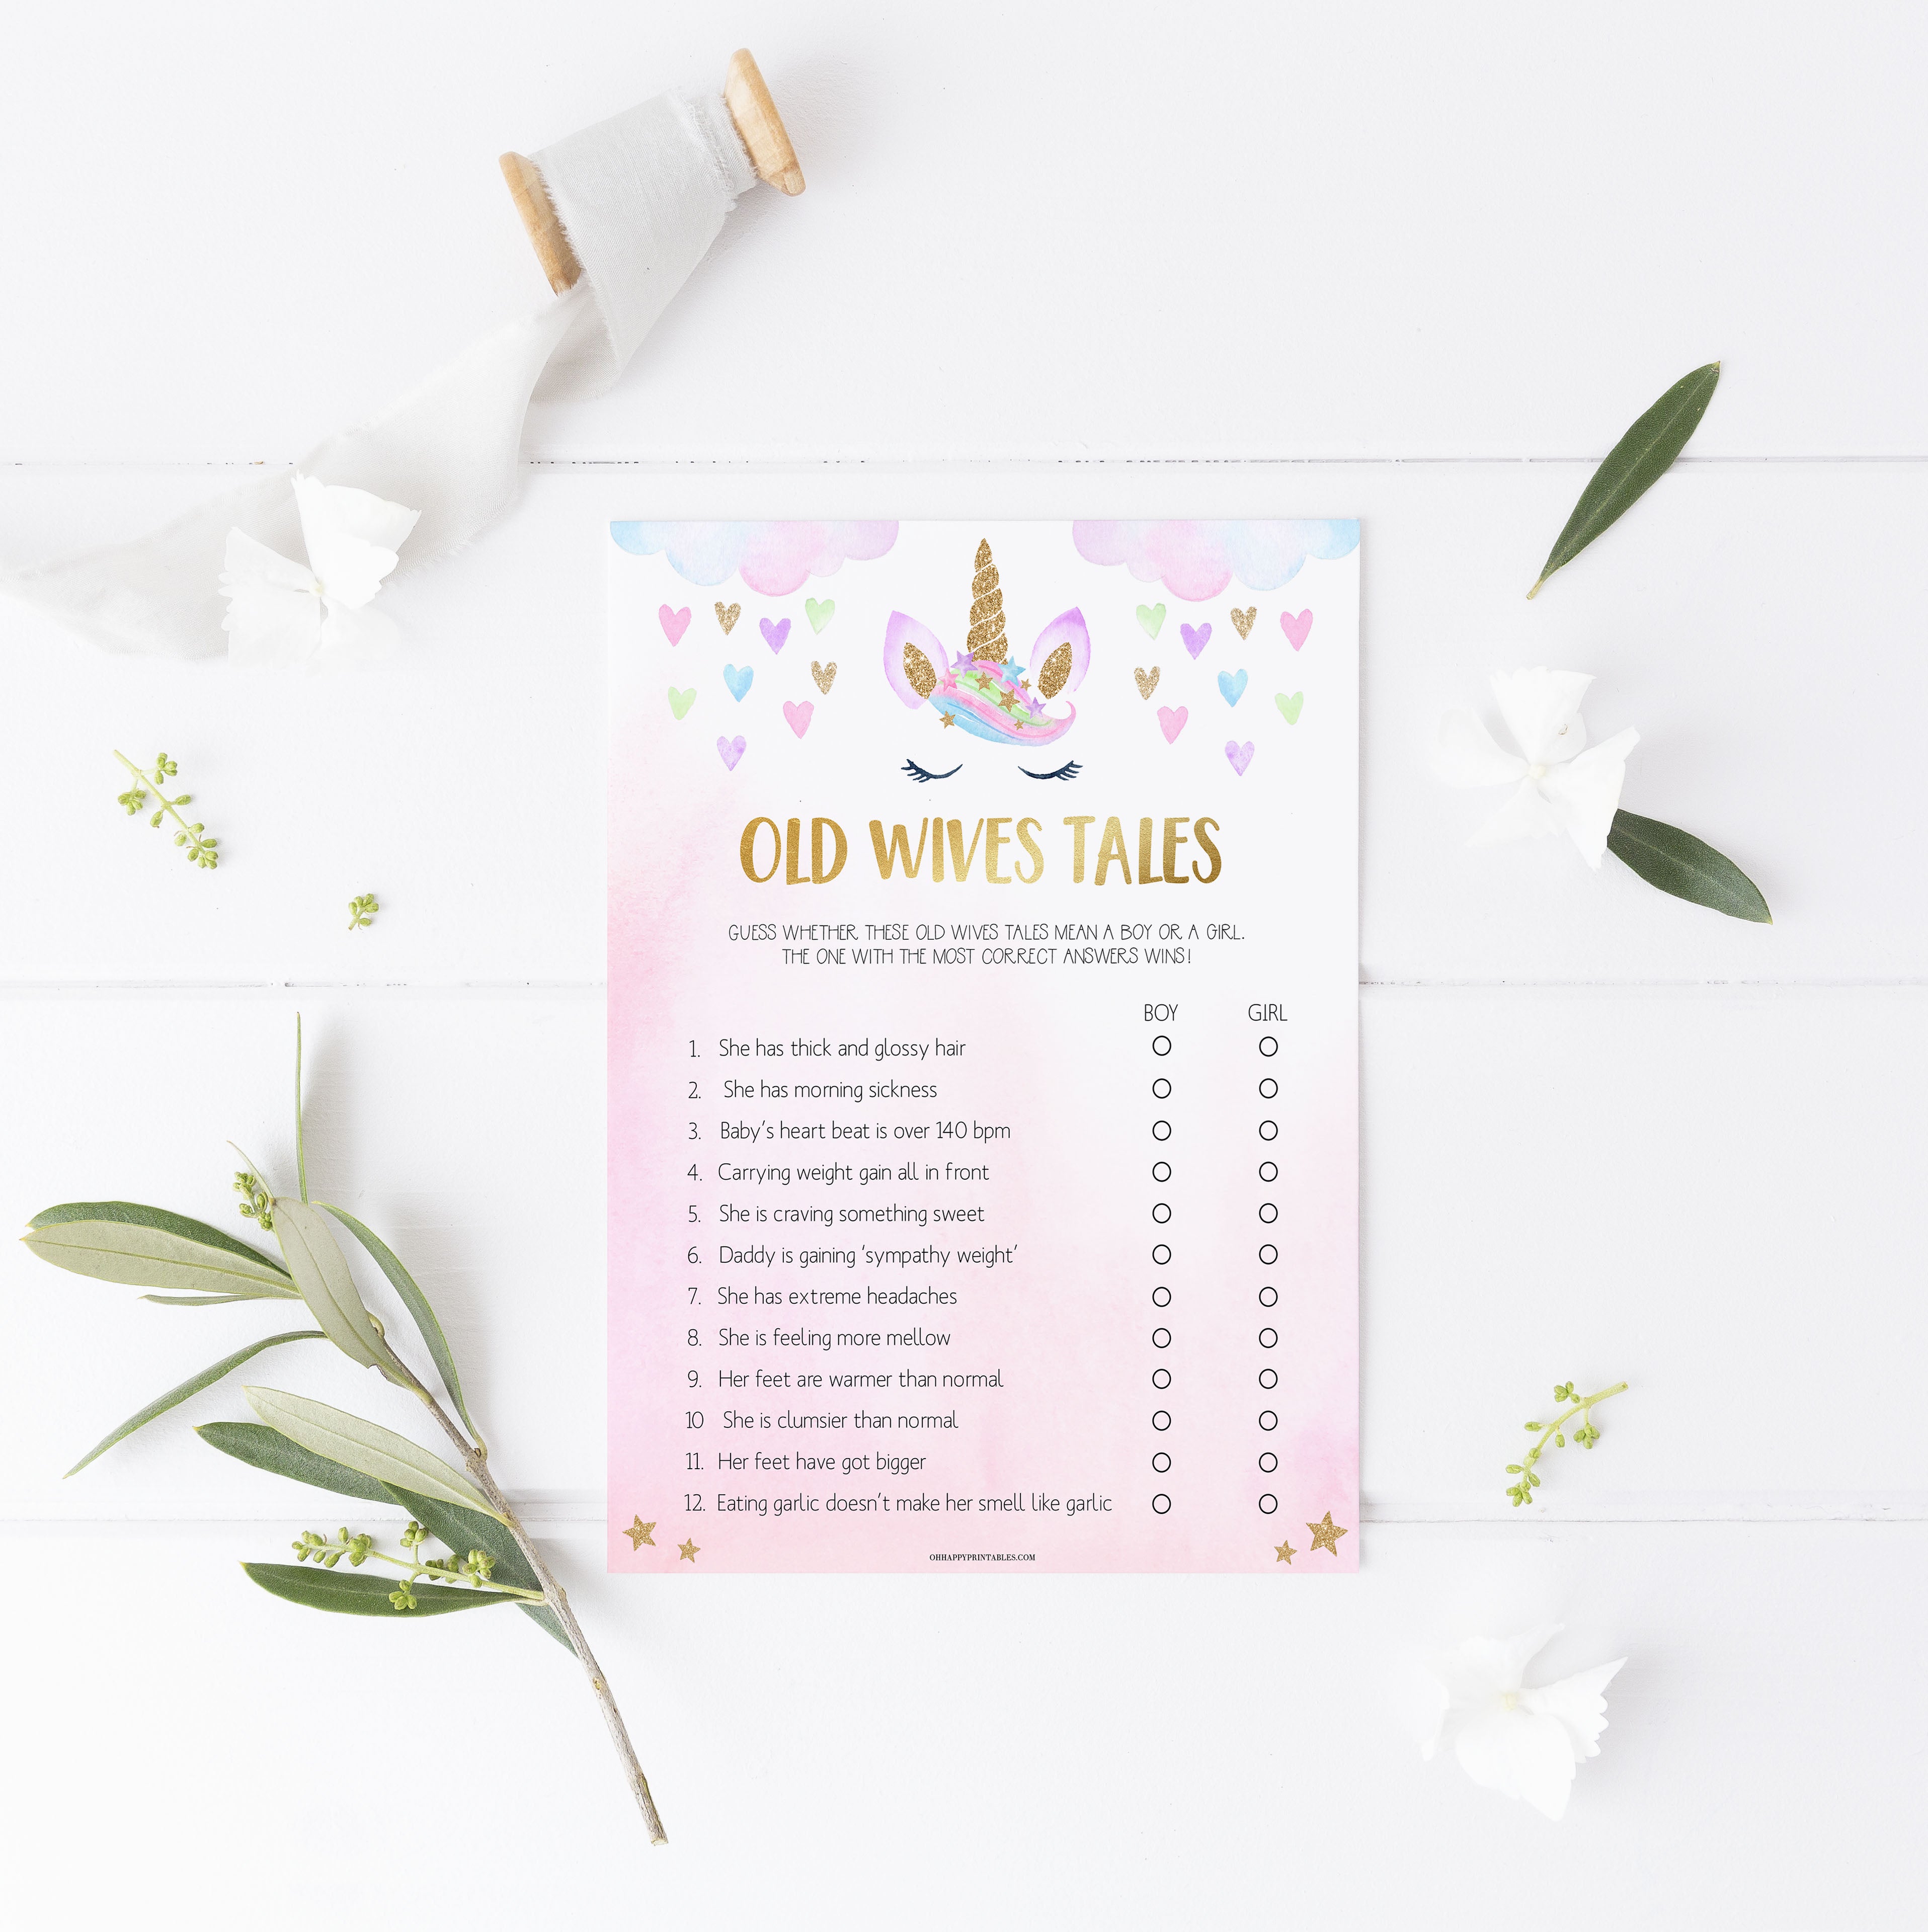 old wives tale baby shower game, Printable baby shower games, unicorn baby games, baby shower games, fun baby shower ideas, top baby shower ideas, unicorn baby shower, baby shower games, fun unicorn baby shower ideas